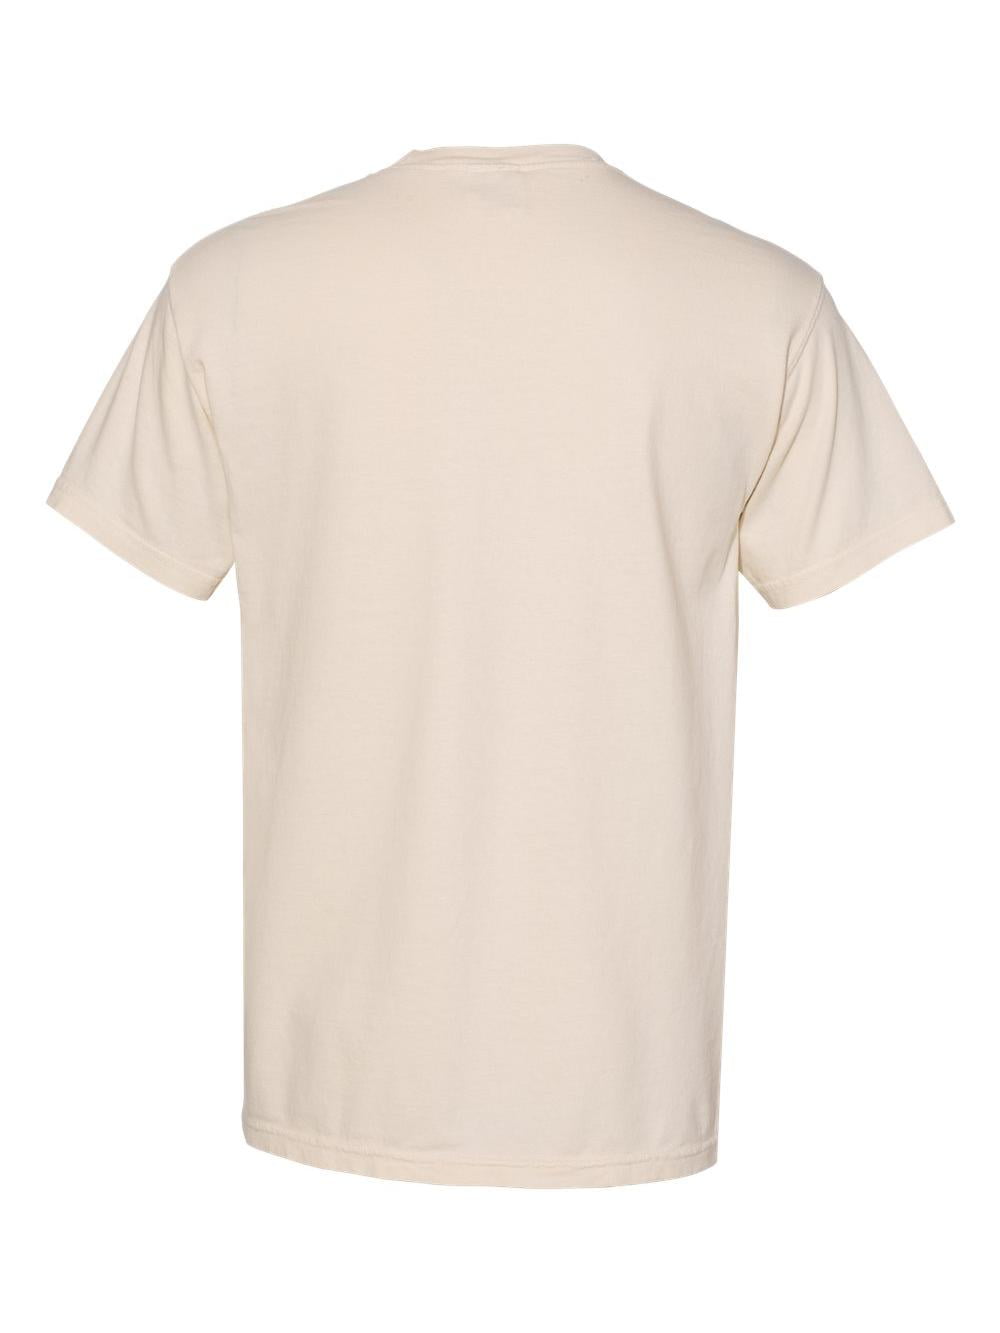 Comfort Colors - Garment-Dyed Heavyweight Pocket T-Shirt - 6030 - Ivory -  Size: S